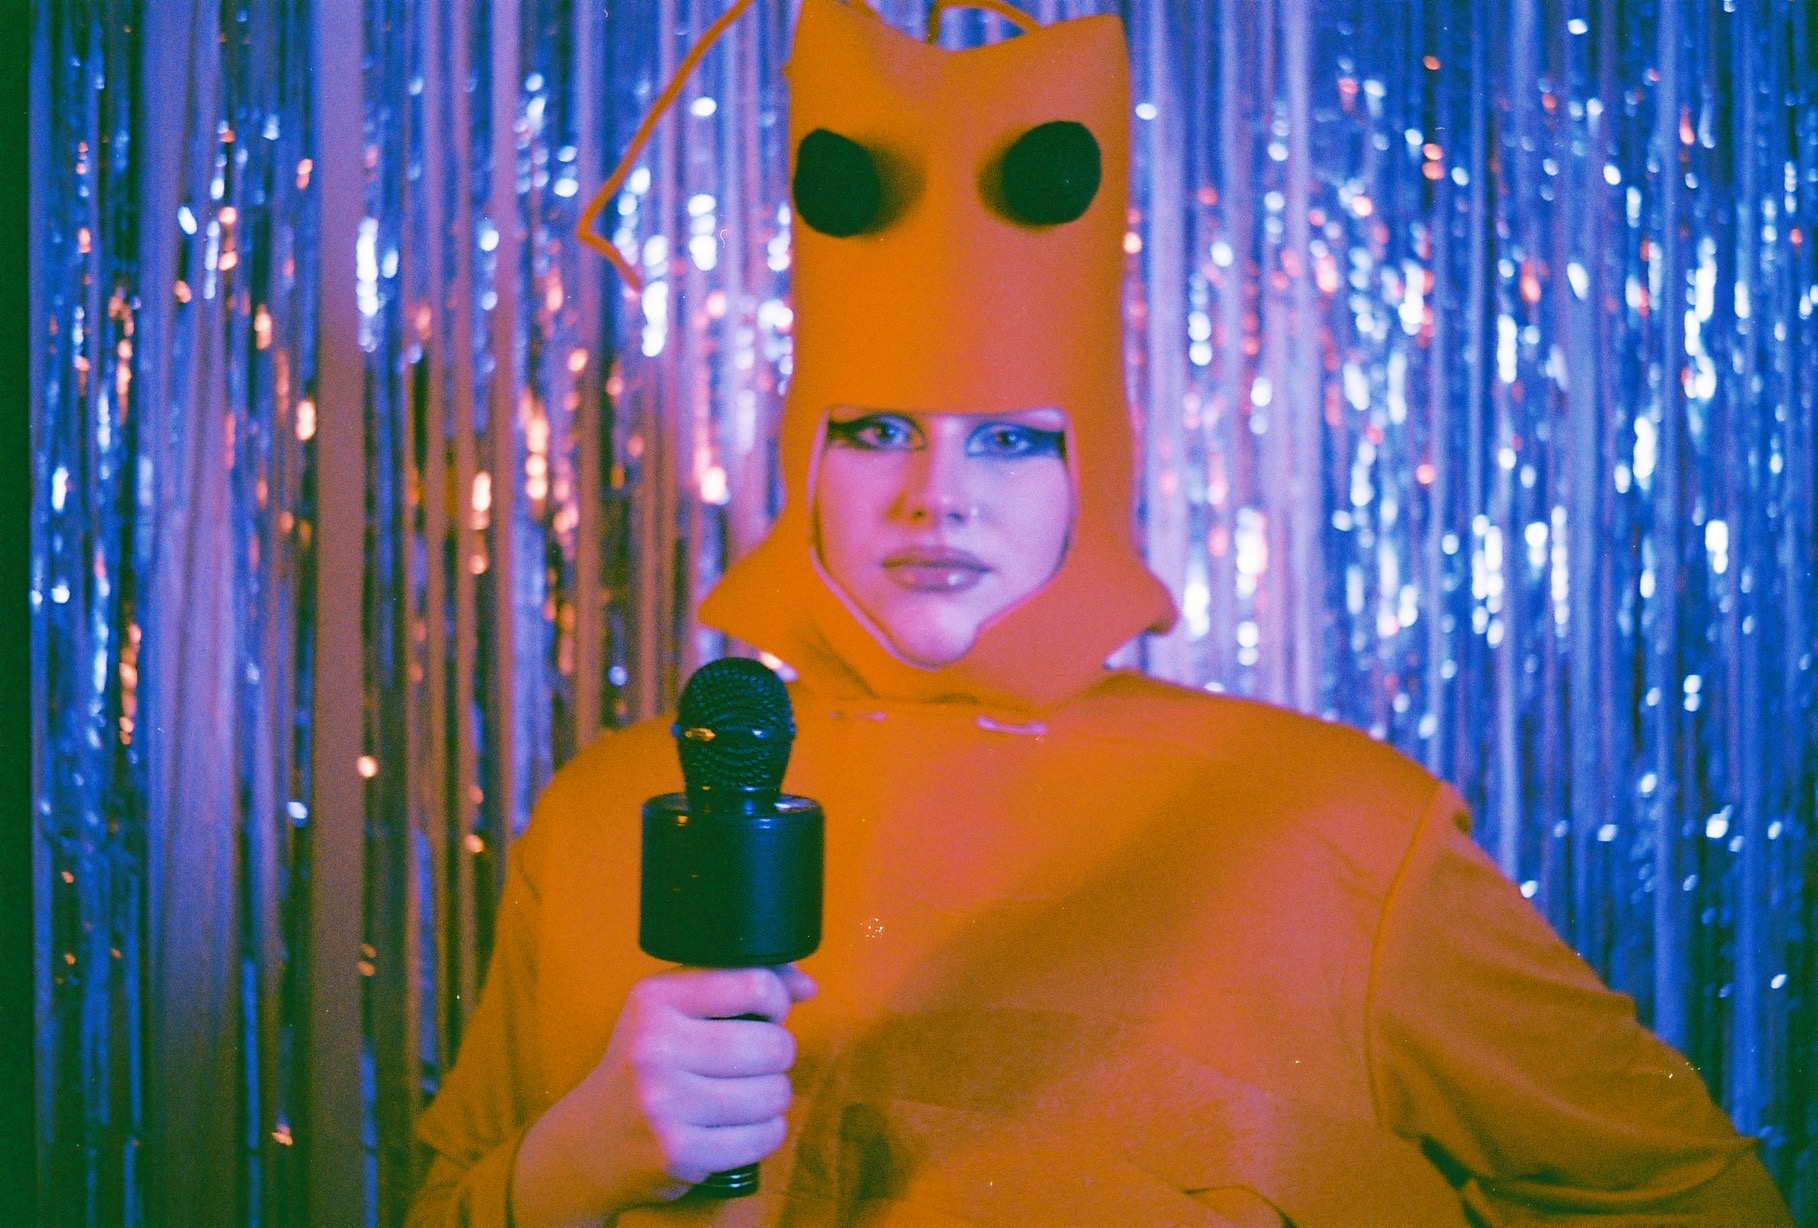 An image of a person dressed as a lobster holding a microphone against a blue background.